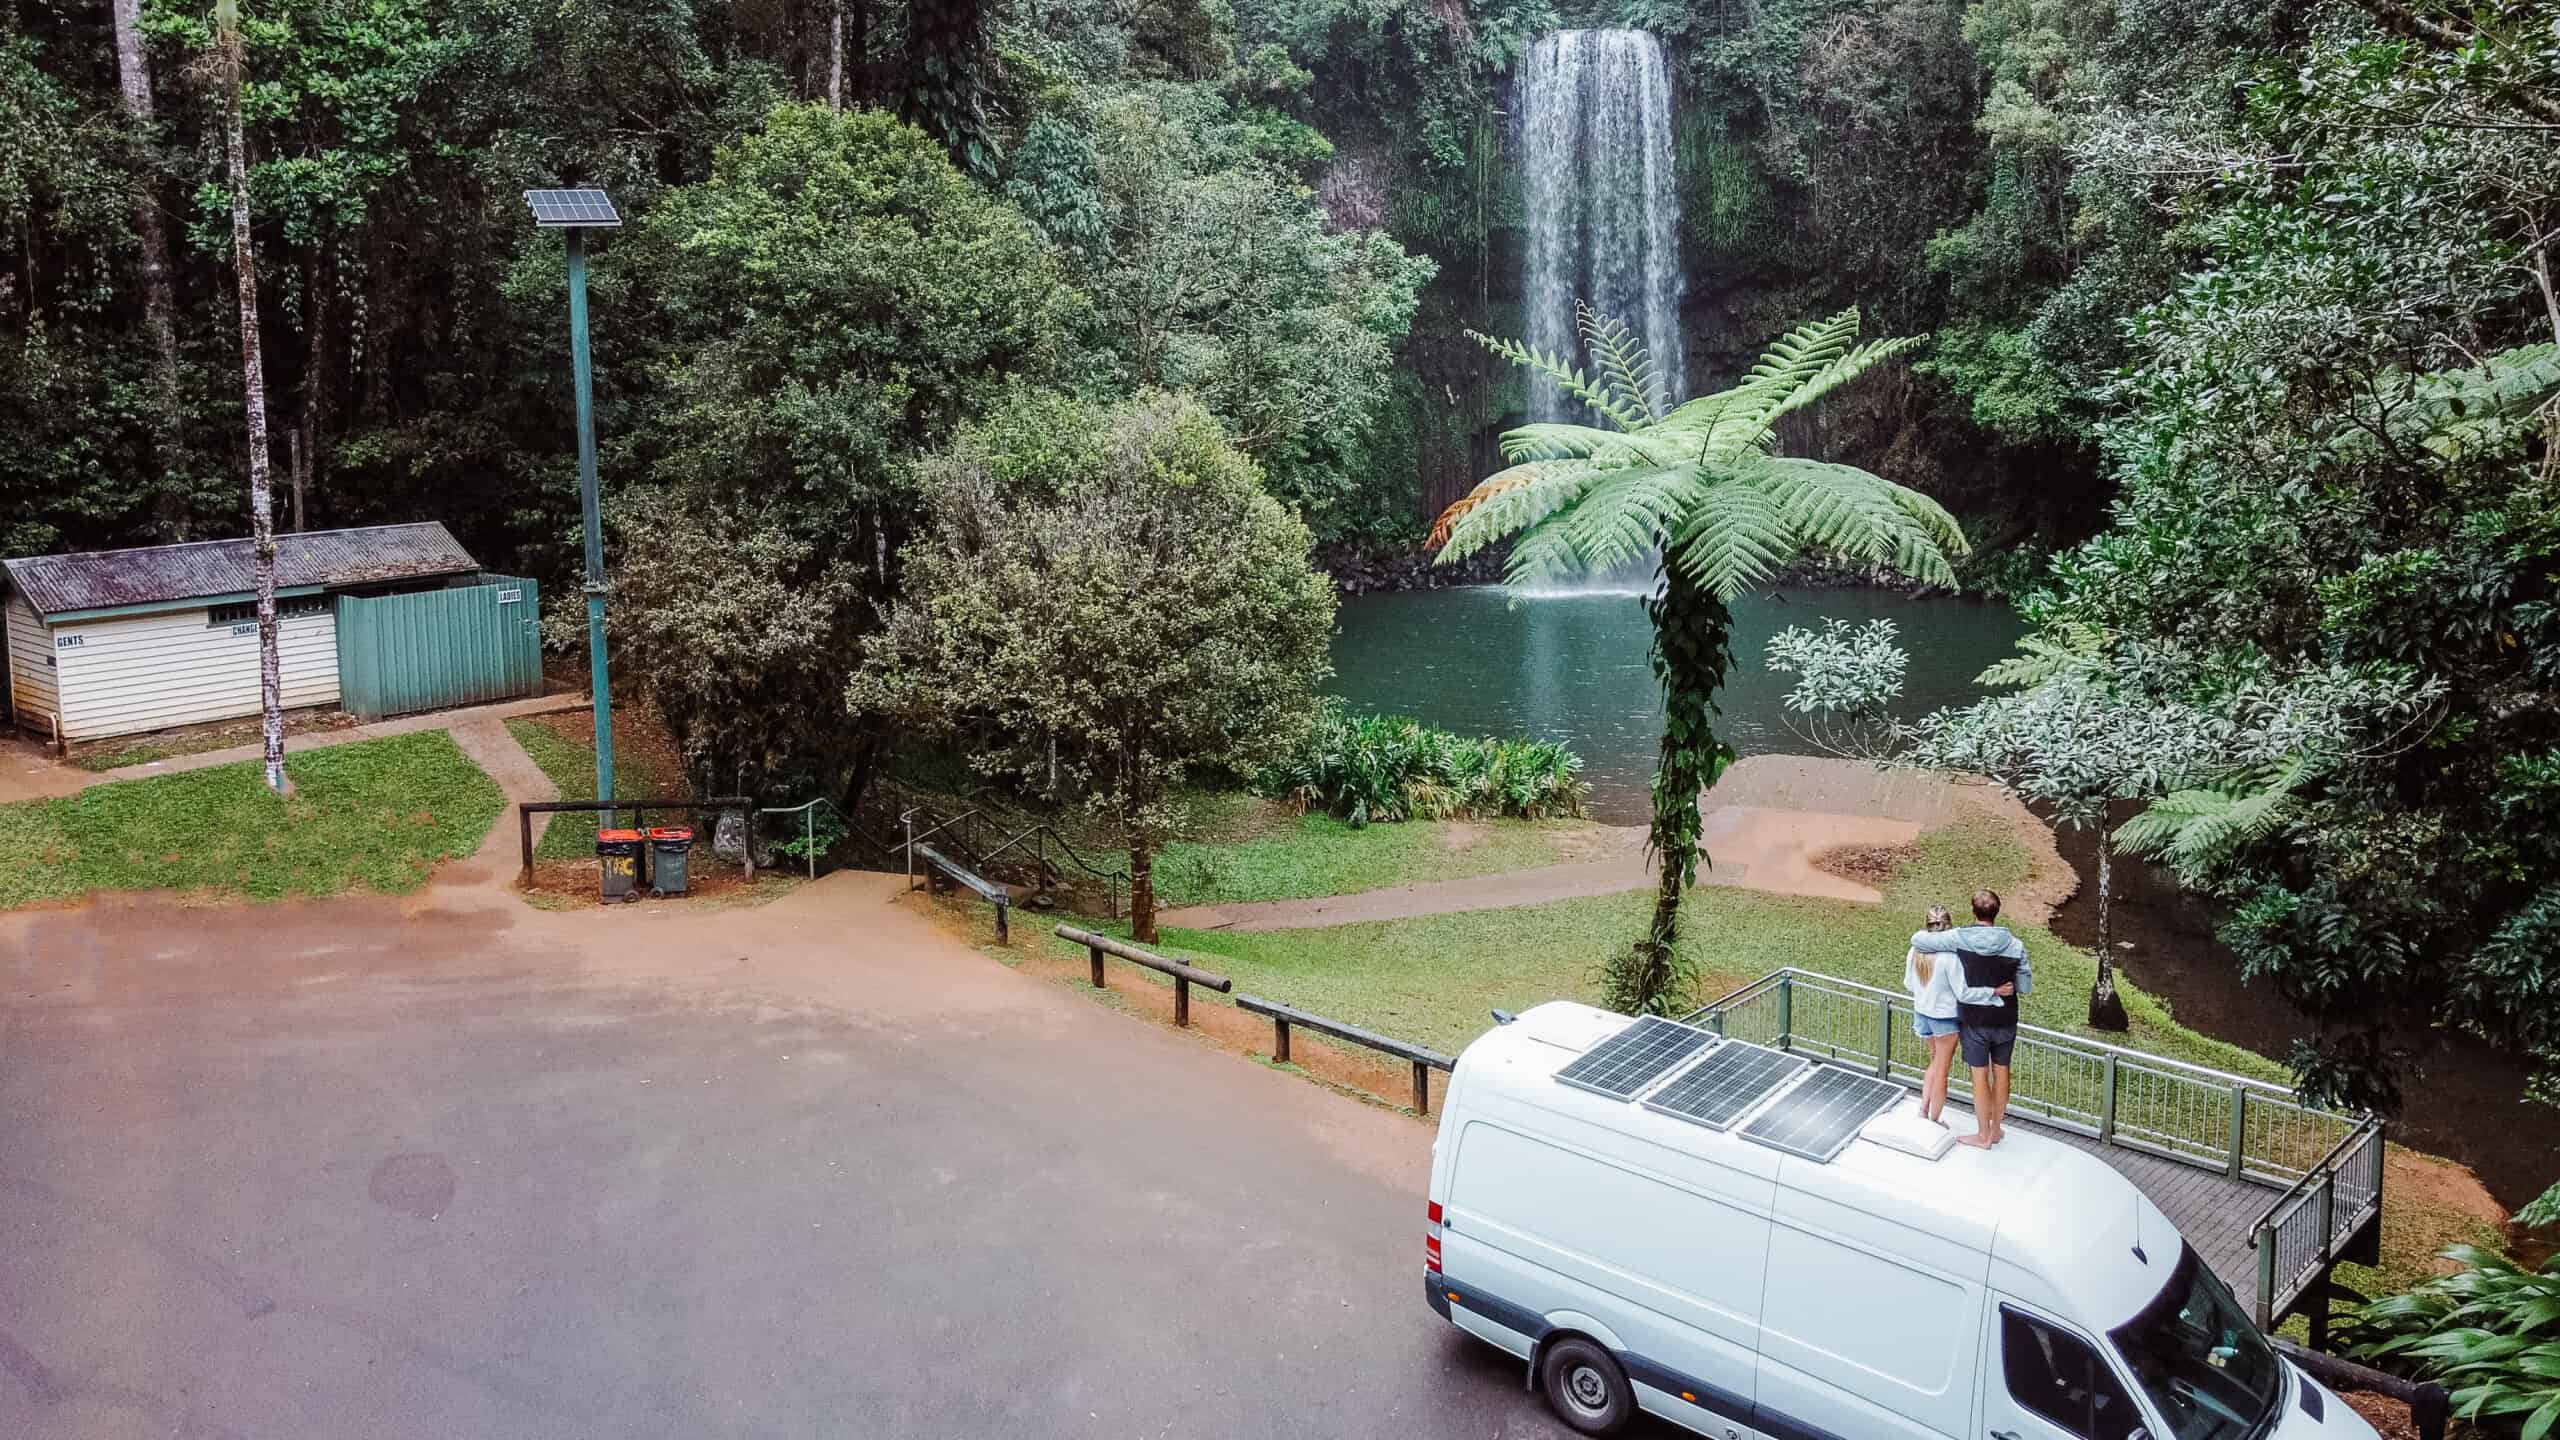 MILLAA MILLAA FALLS - A Must See For Anyone Visiting Cairns